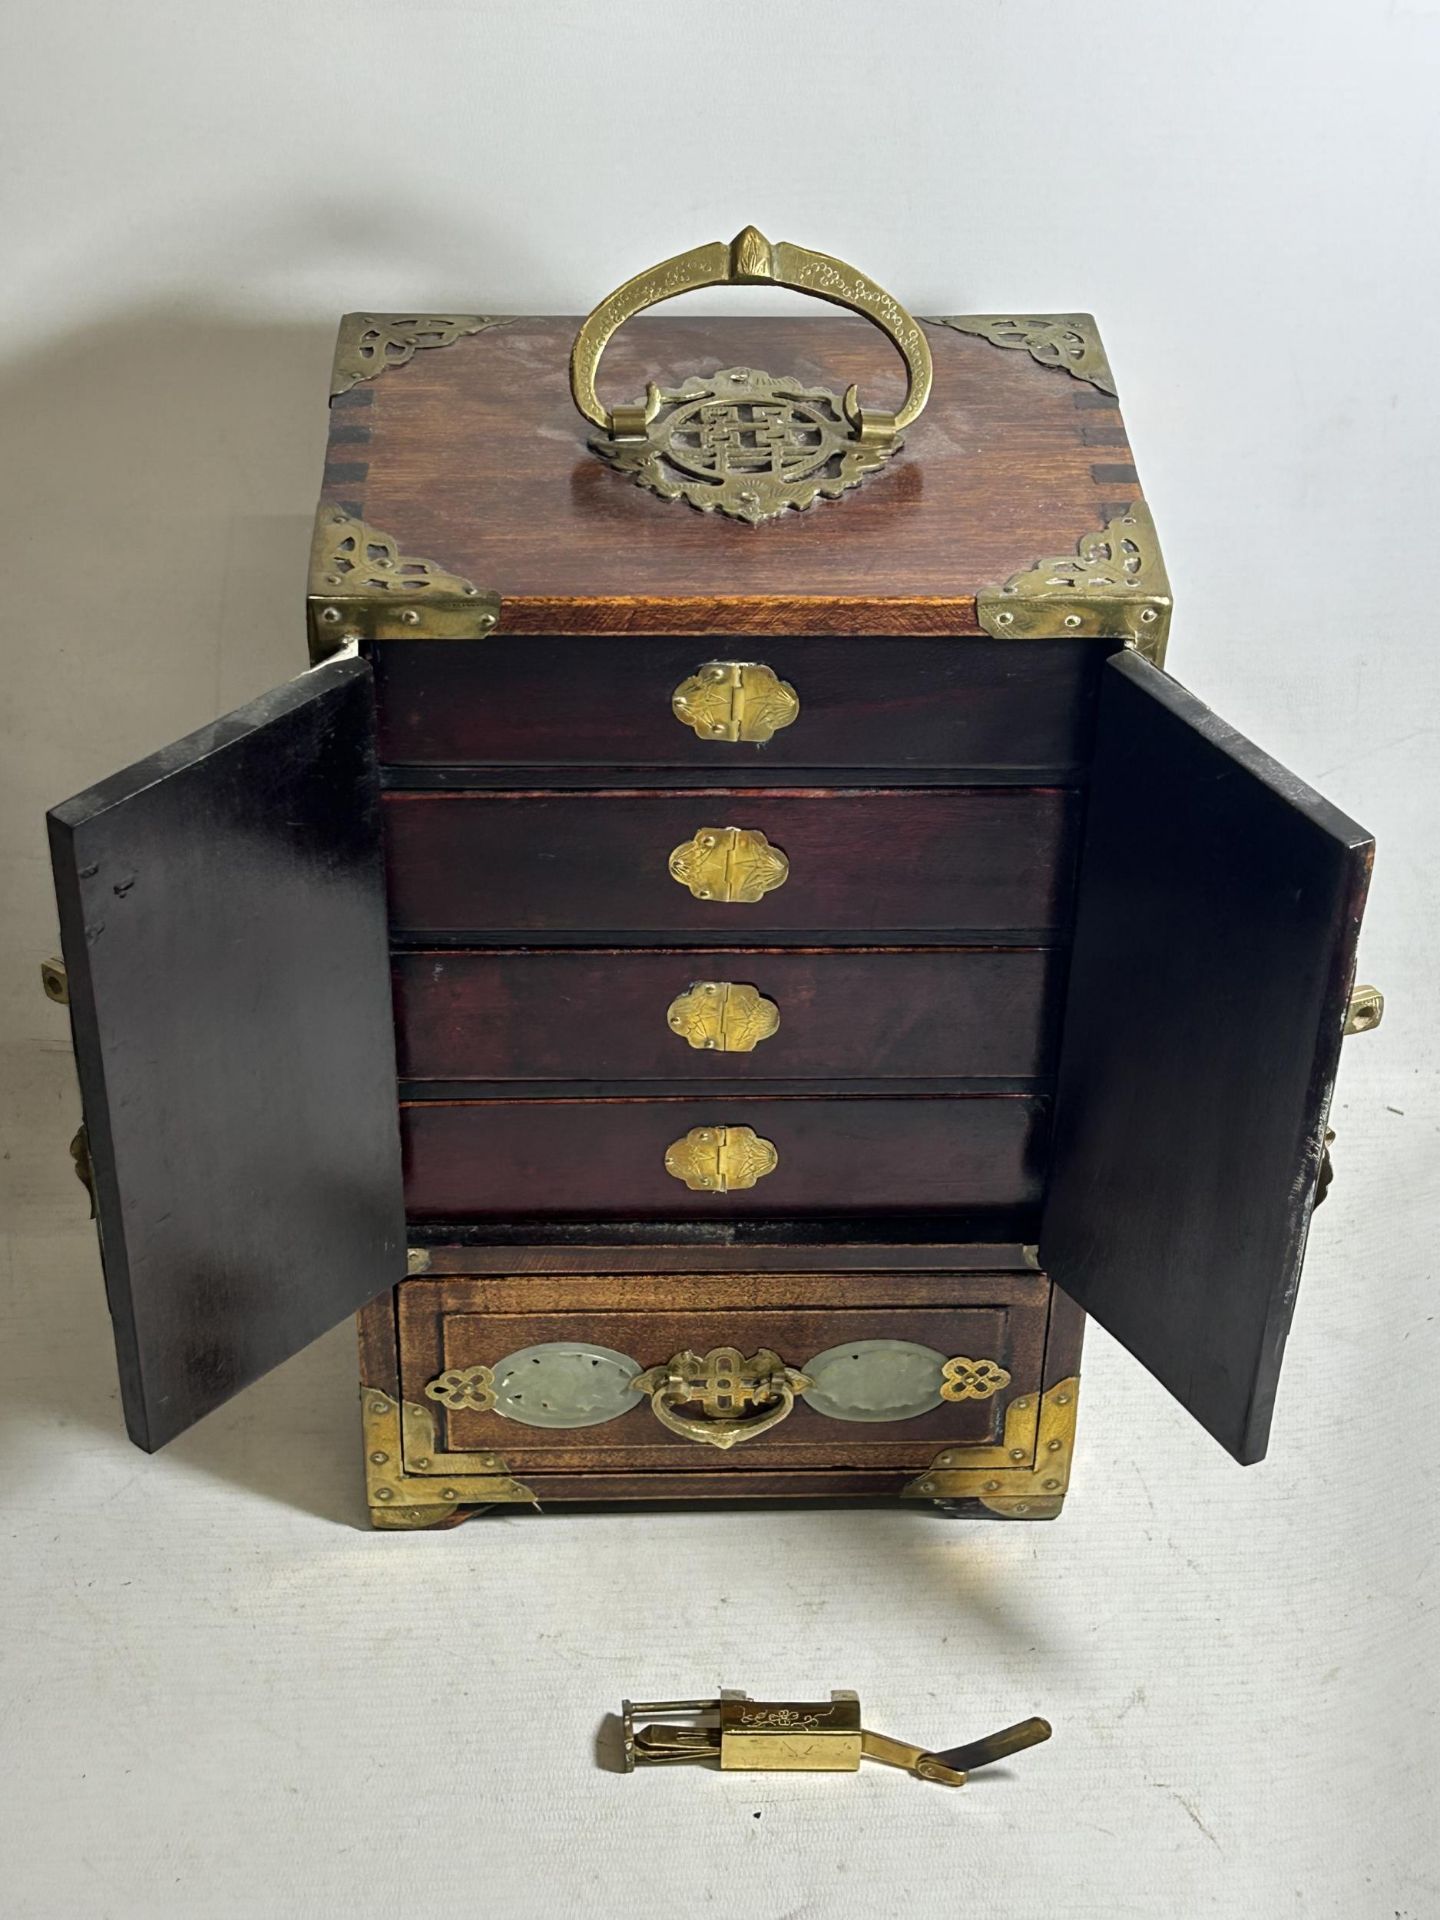 AN ORIENTAL JEWELLERY CABINET, WITH HIDDEN DRAWERS AND BRASS FITTINGS, ALONG WITH JADE STYLE INSERTS - Image 3 of 5